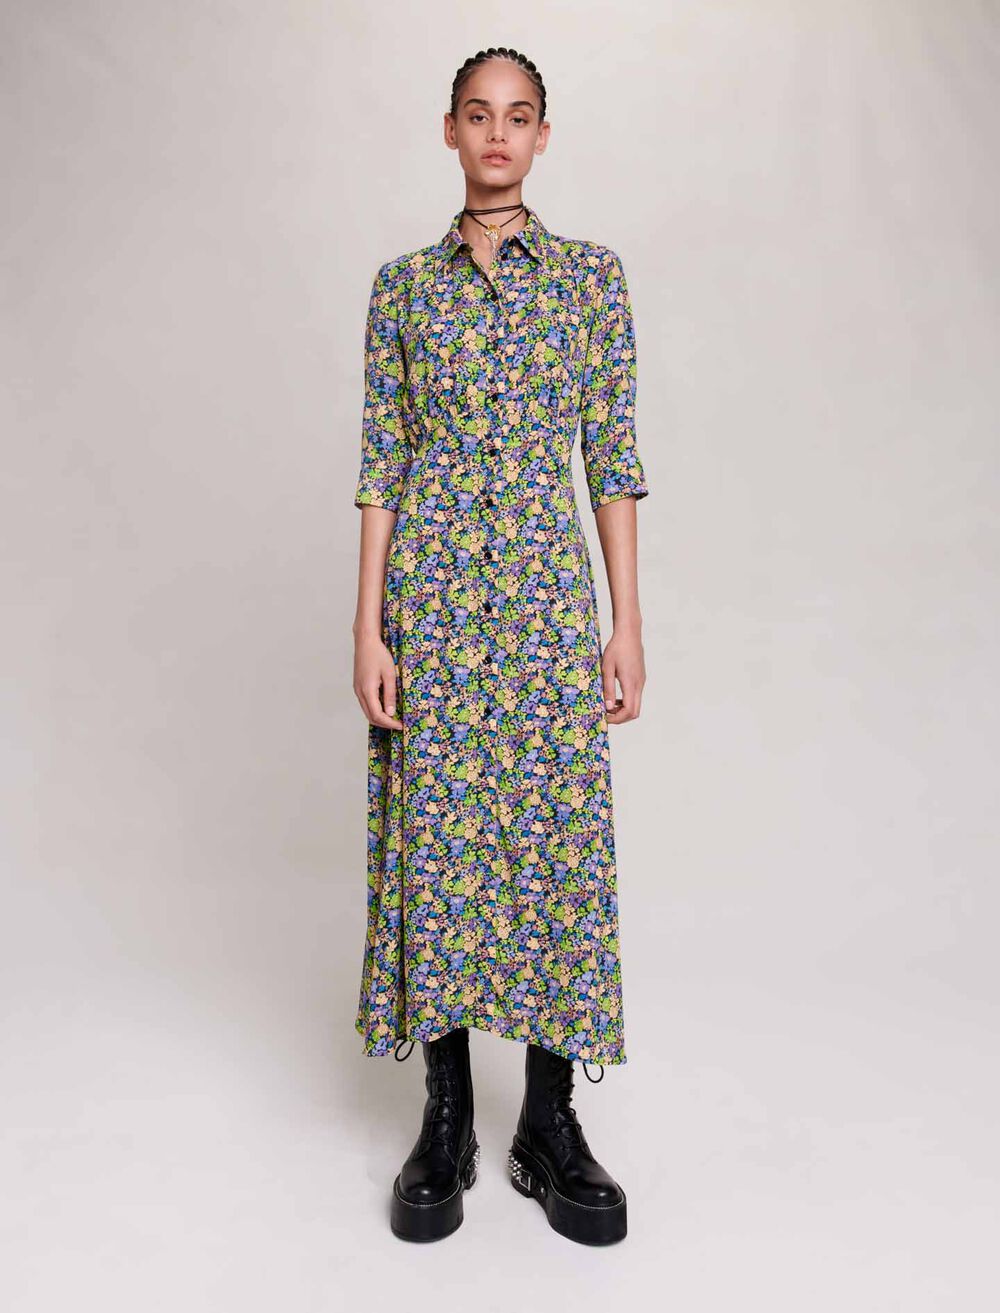 Primroses Multico Print featured LONG FLORAL DRESS